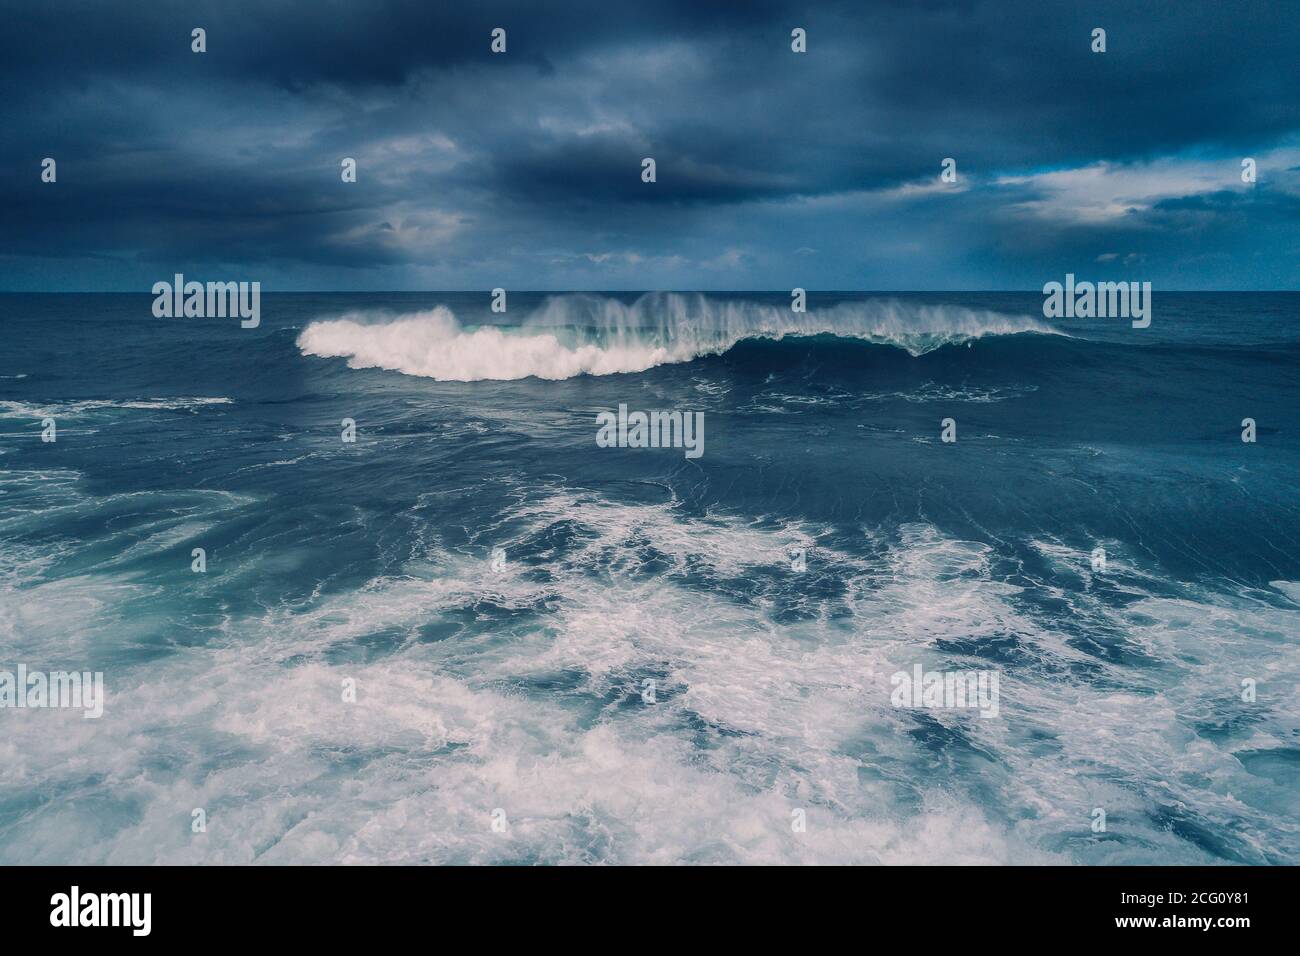 Moody weather conditions with heavy wave crashing along coastline Stock Photo